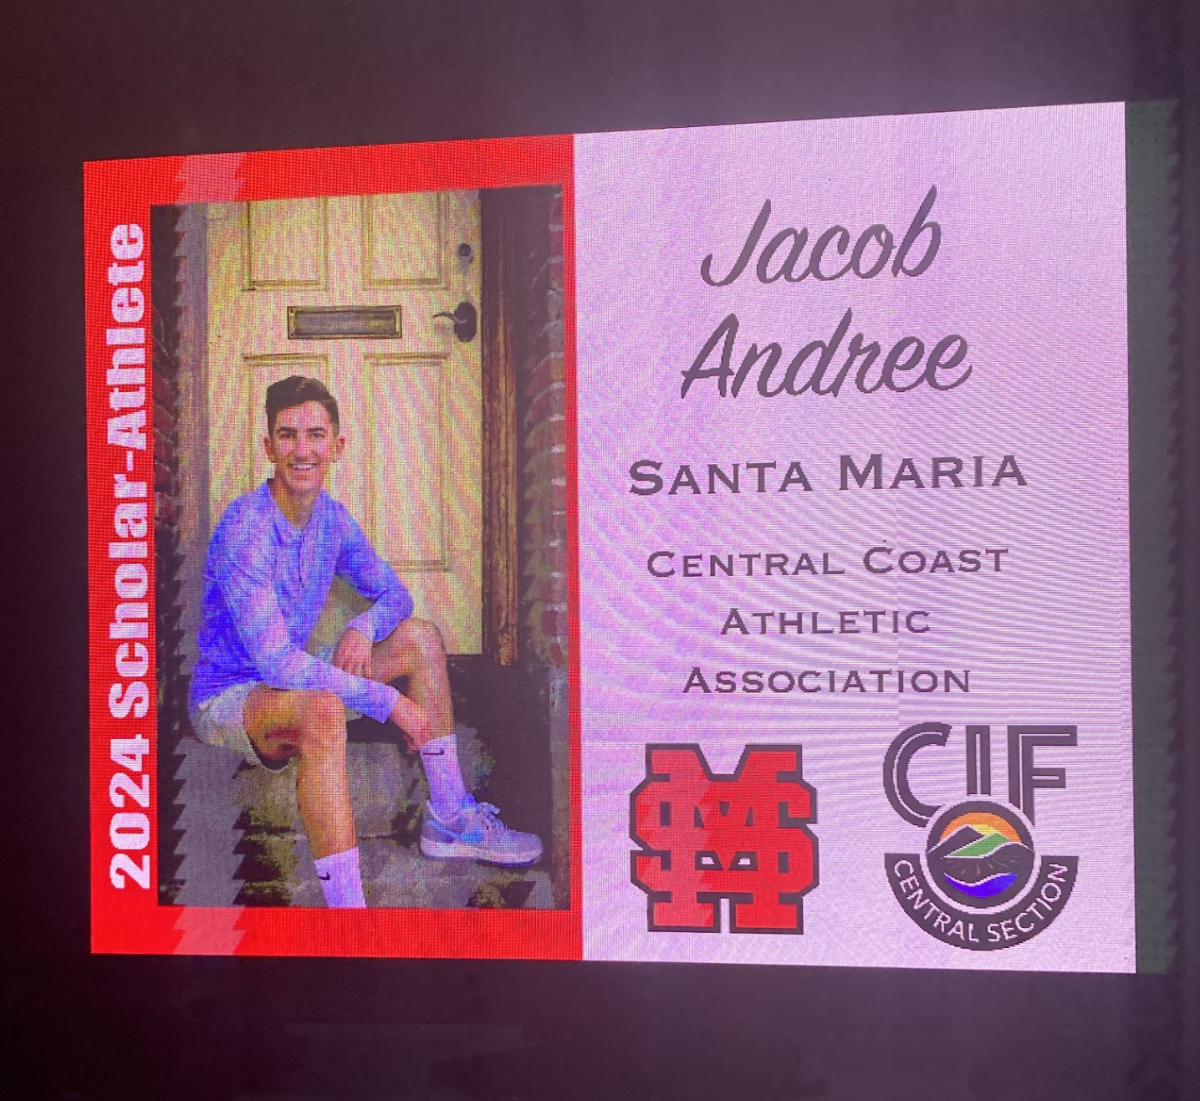 Jacob Andree, Scholar-Athlete of the Central Coast Athletic Association.
photo provided by arcy pineda